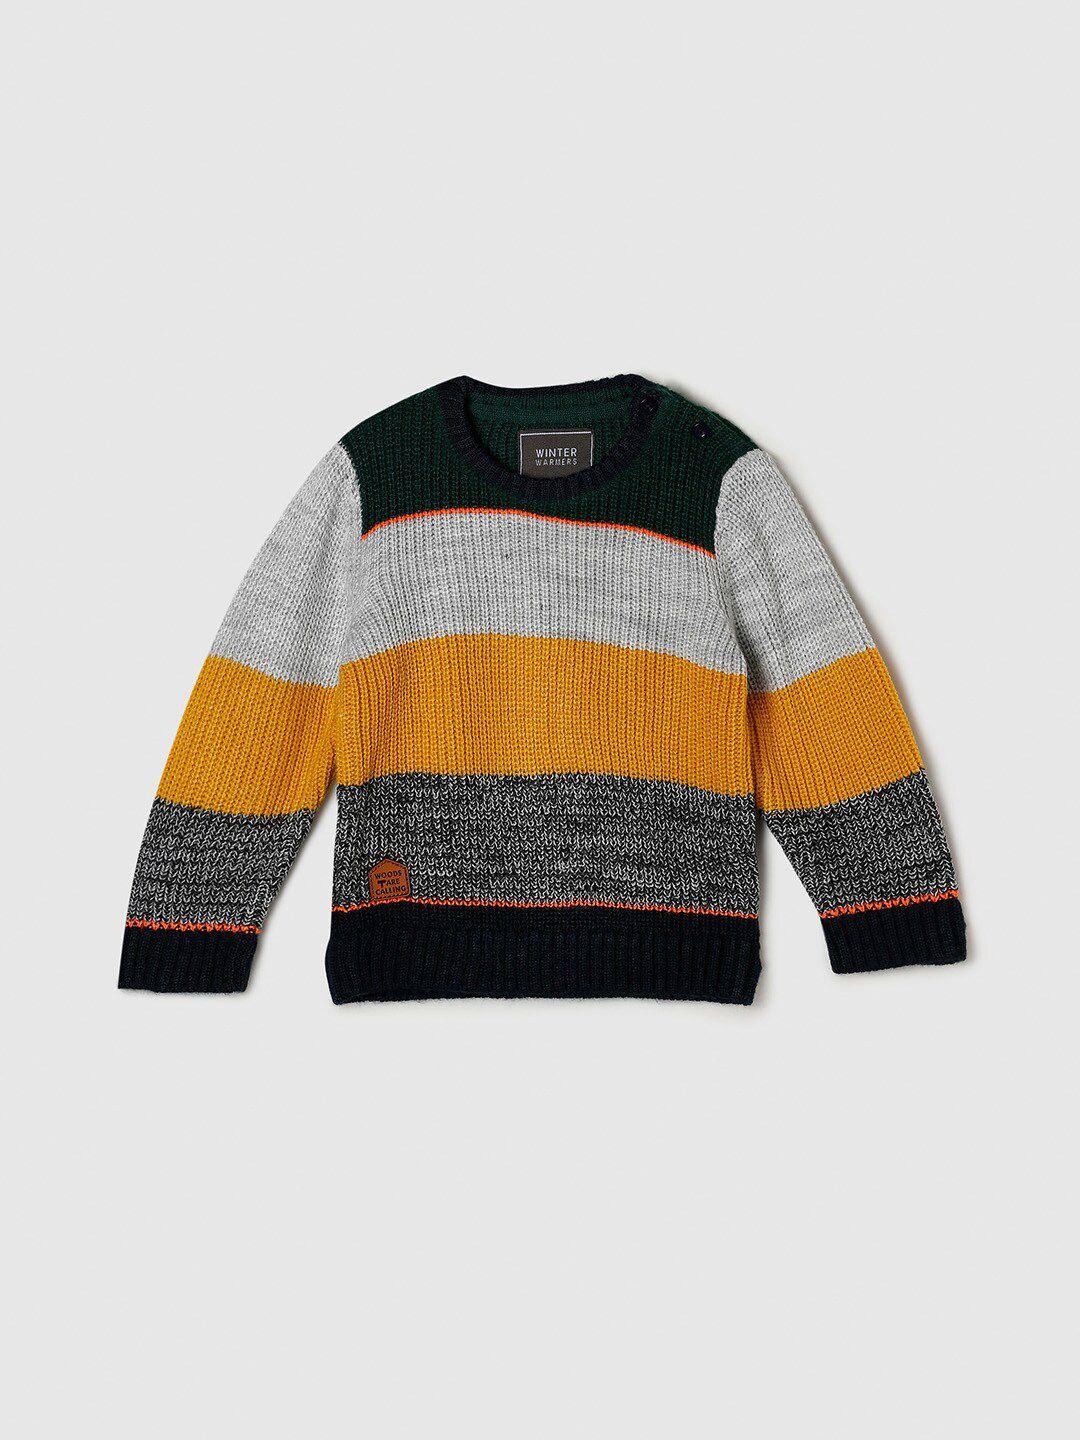 max-boys-grey-&-yellow-striped-pullover